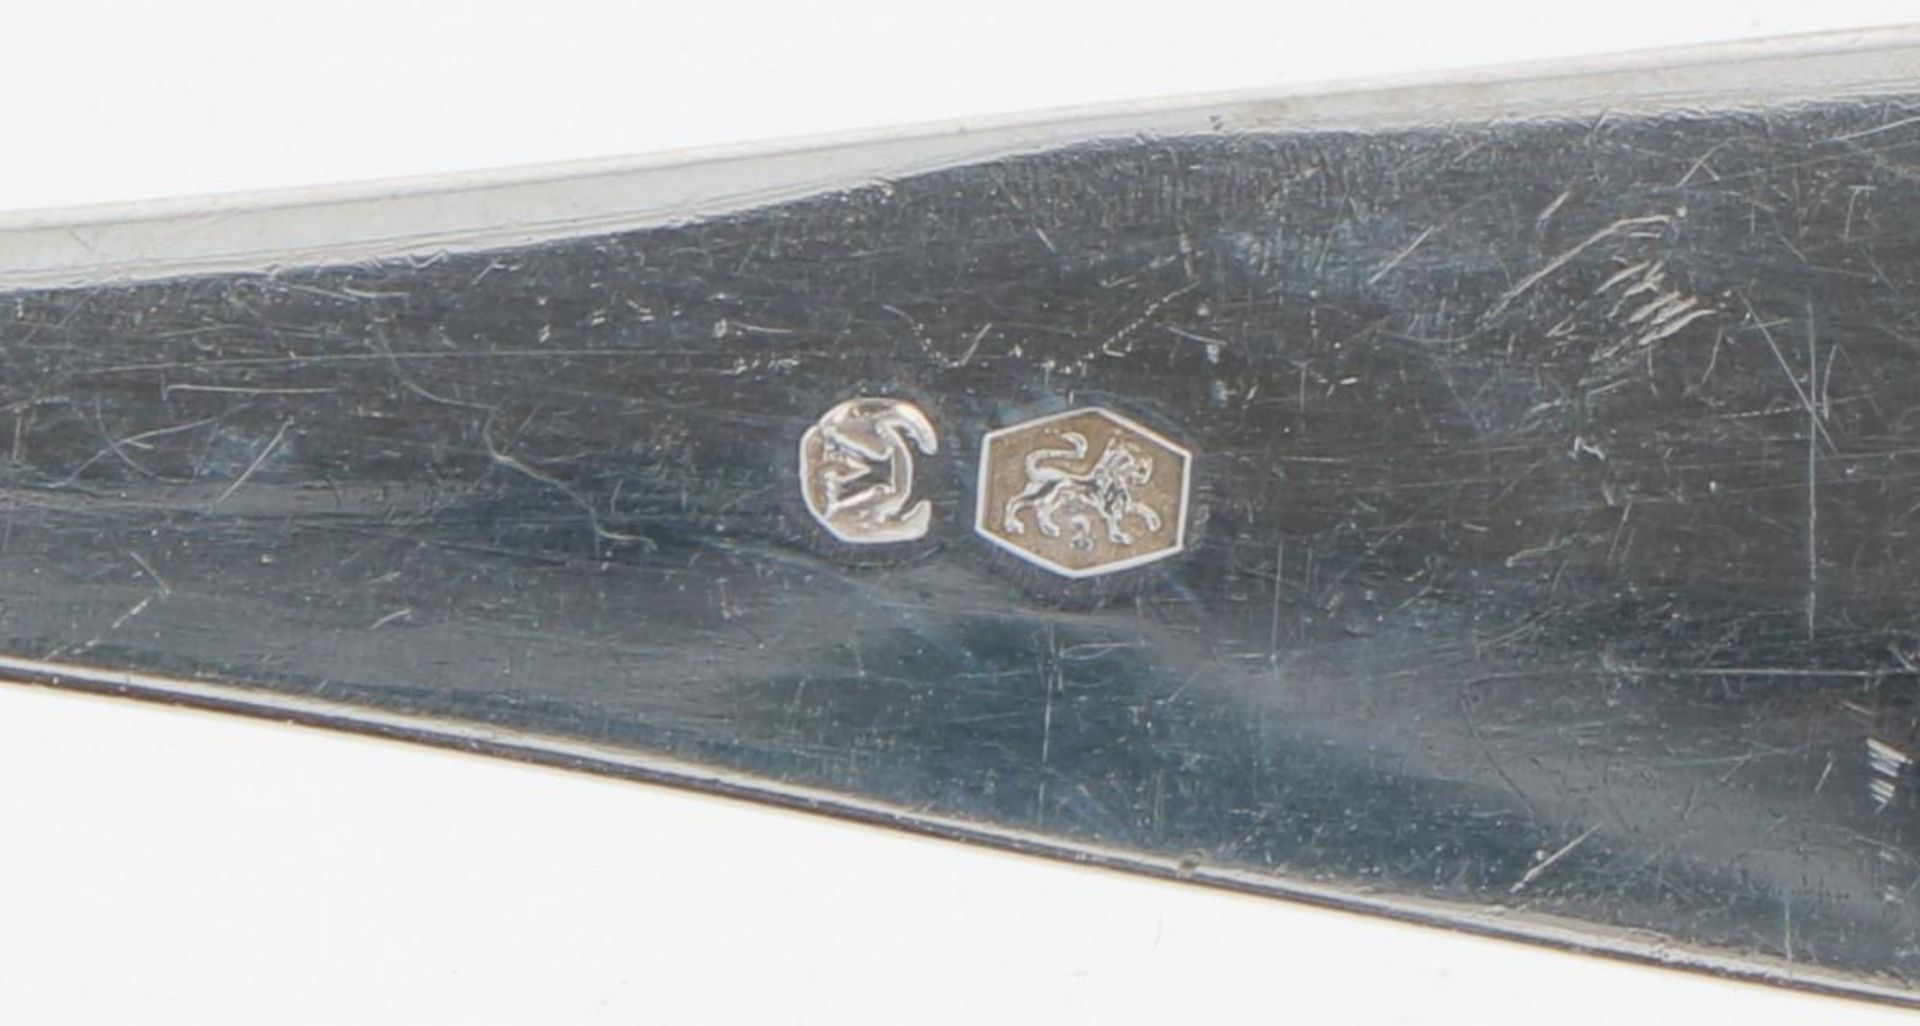 (2) piece set of scoops "Dutch point fillet" silver. - Image 4 of 7